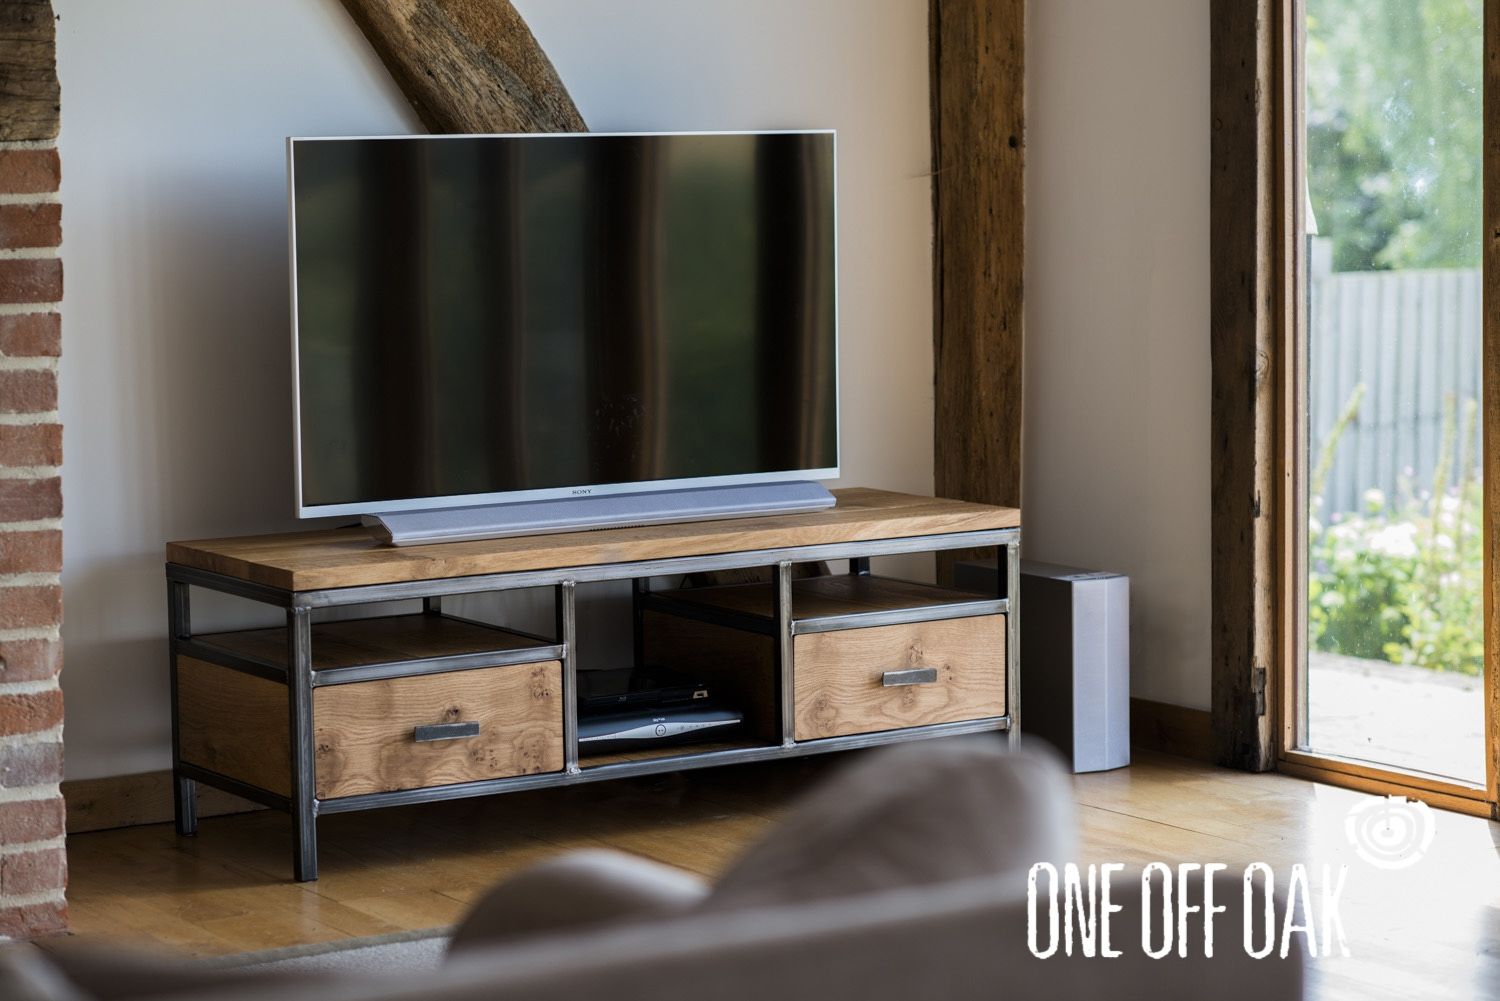 Tv Cabinet Bespoke Handmade Furniture From English Oak Pertaining To Bespoke Tv Cabinets (View 13 of 15)